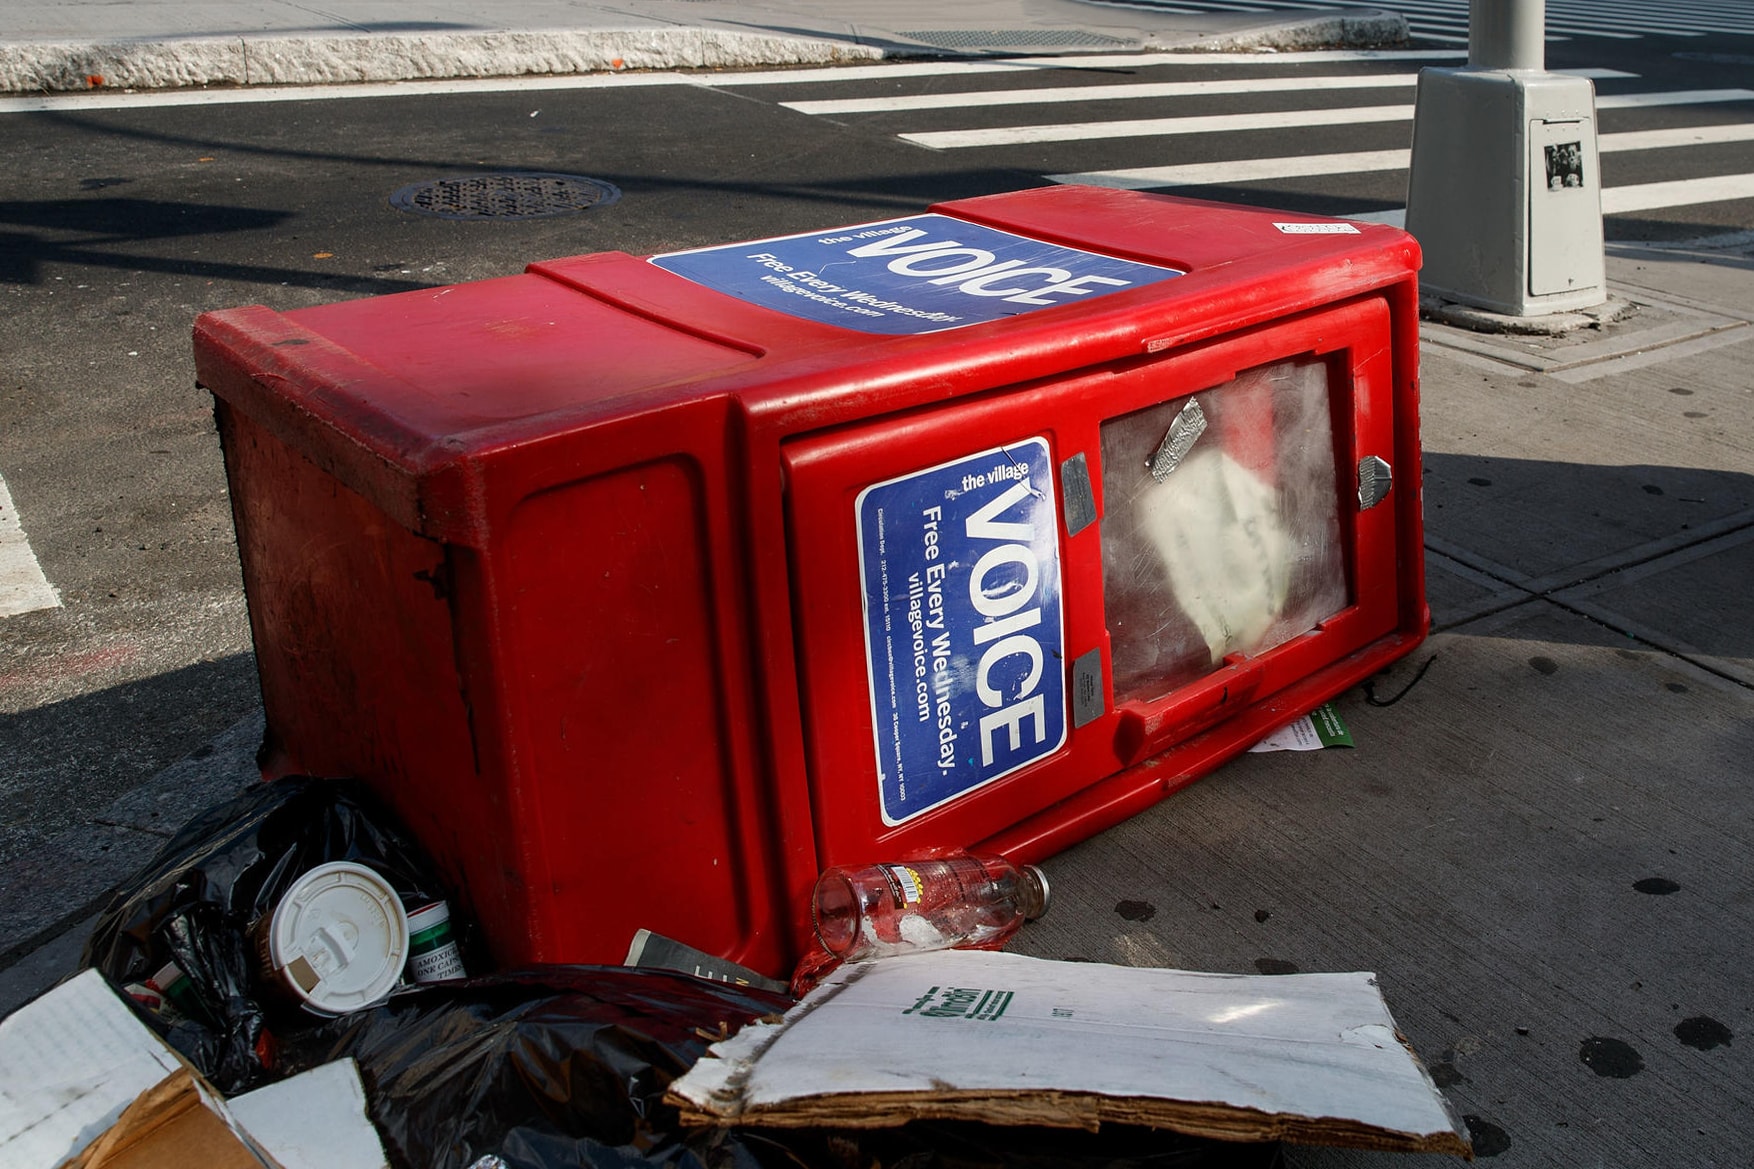 The Village Voice Folding Shutting Down Ending Quitting Fired